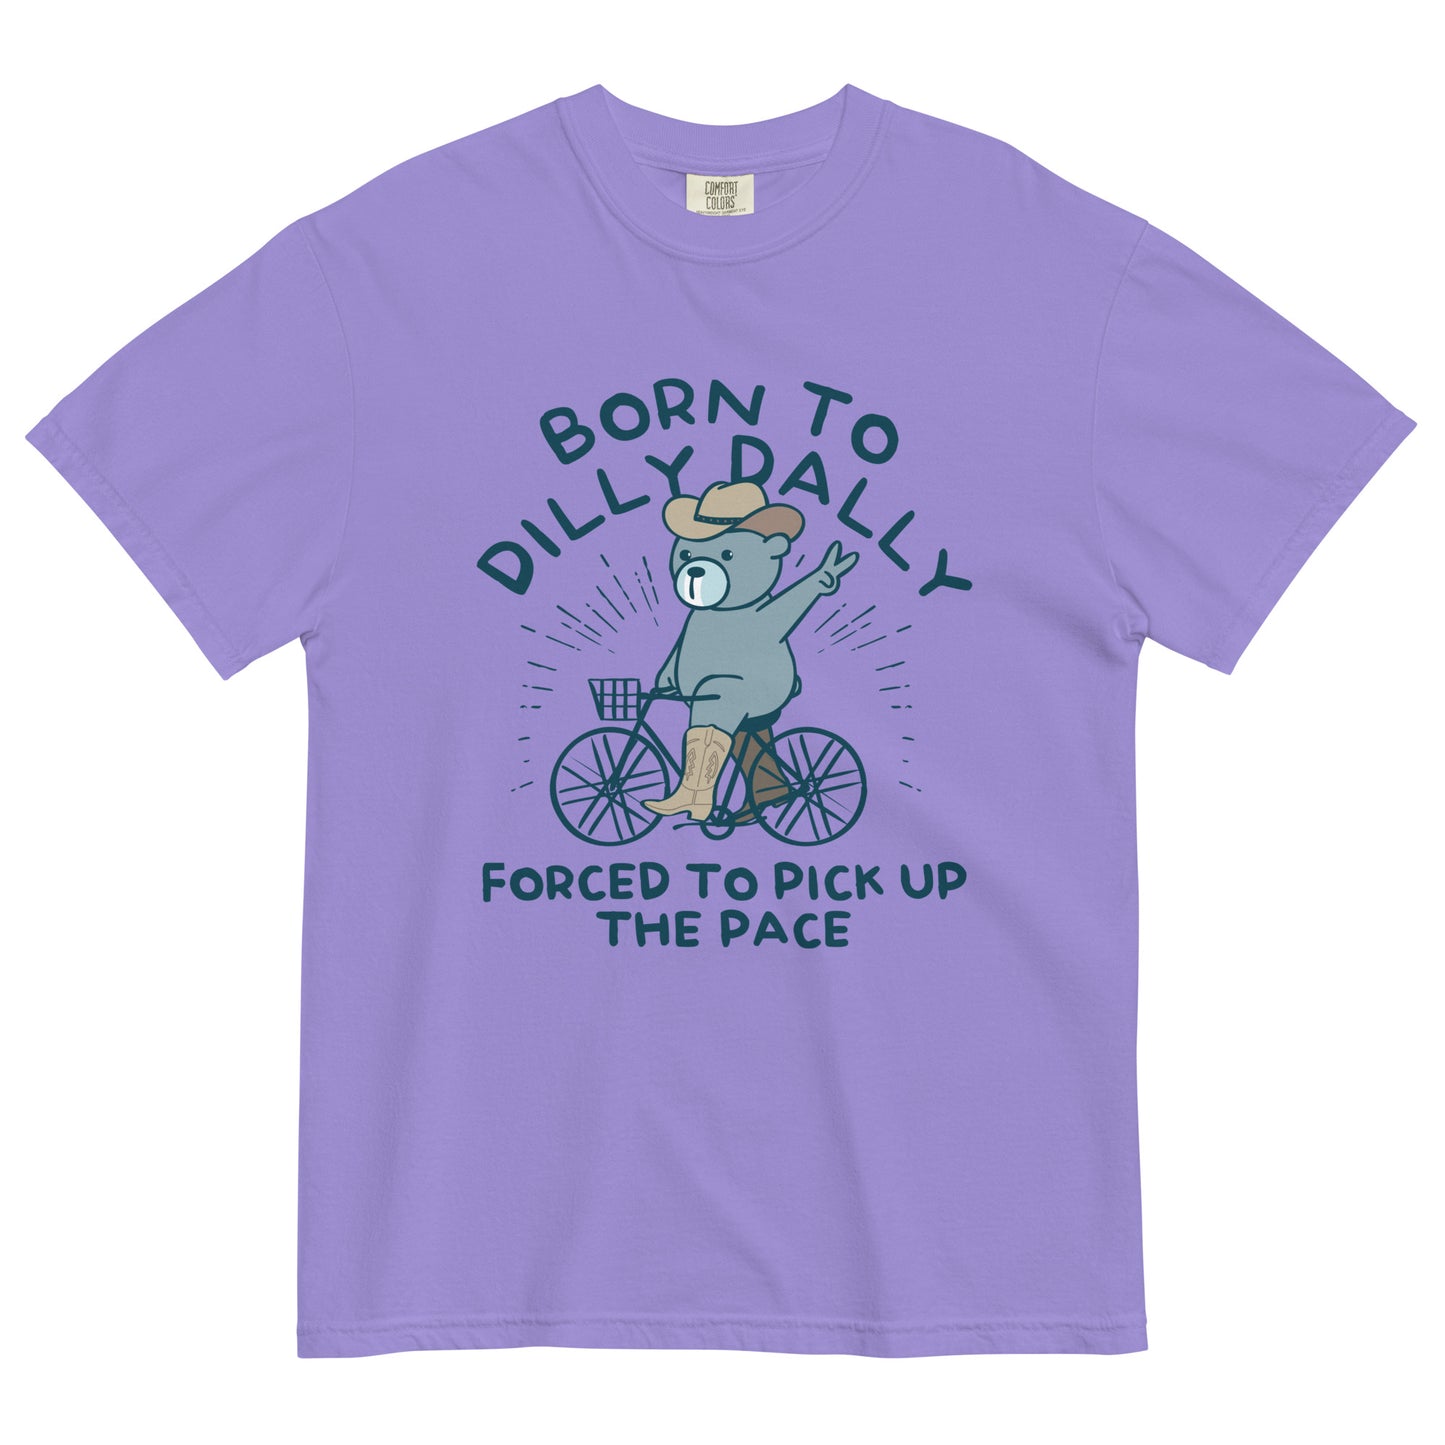 Born To Dilly Dally Forced To Pick Up The Pace Men's Relaxed Fit Tee